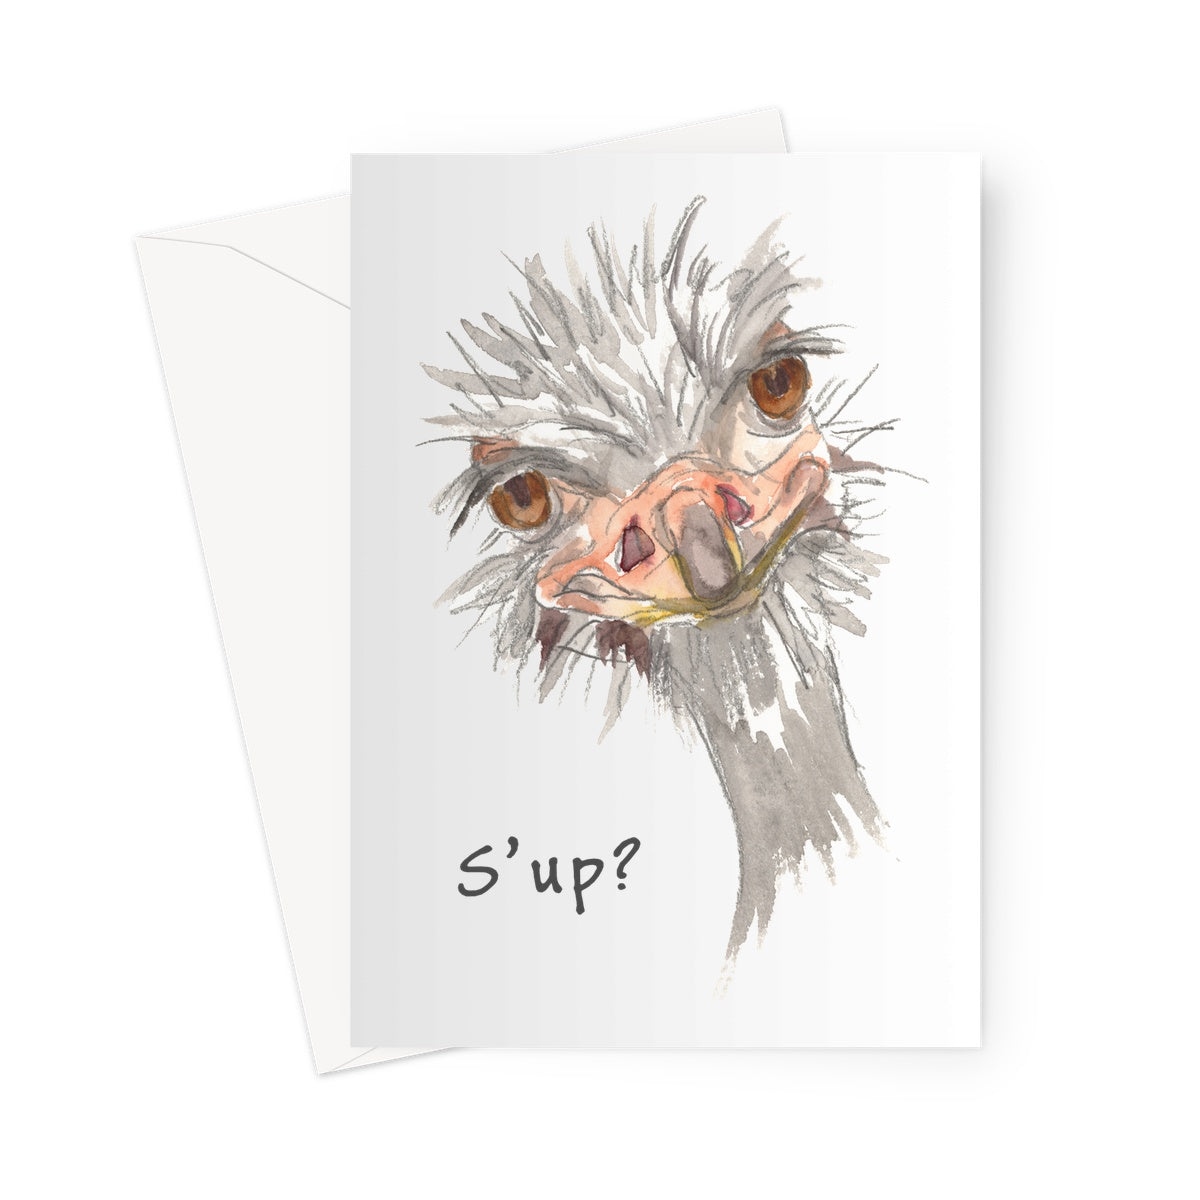 'S'up' Greetings Card